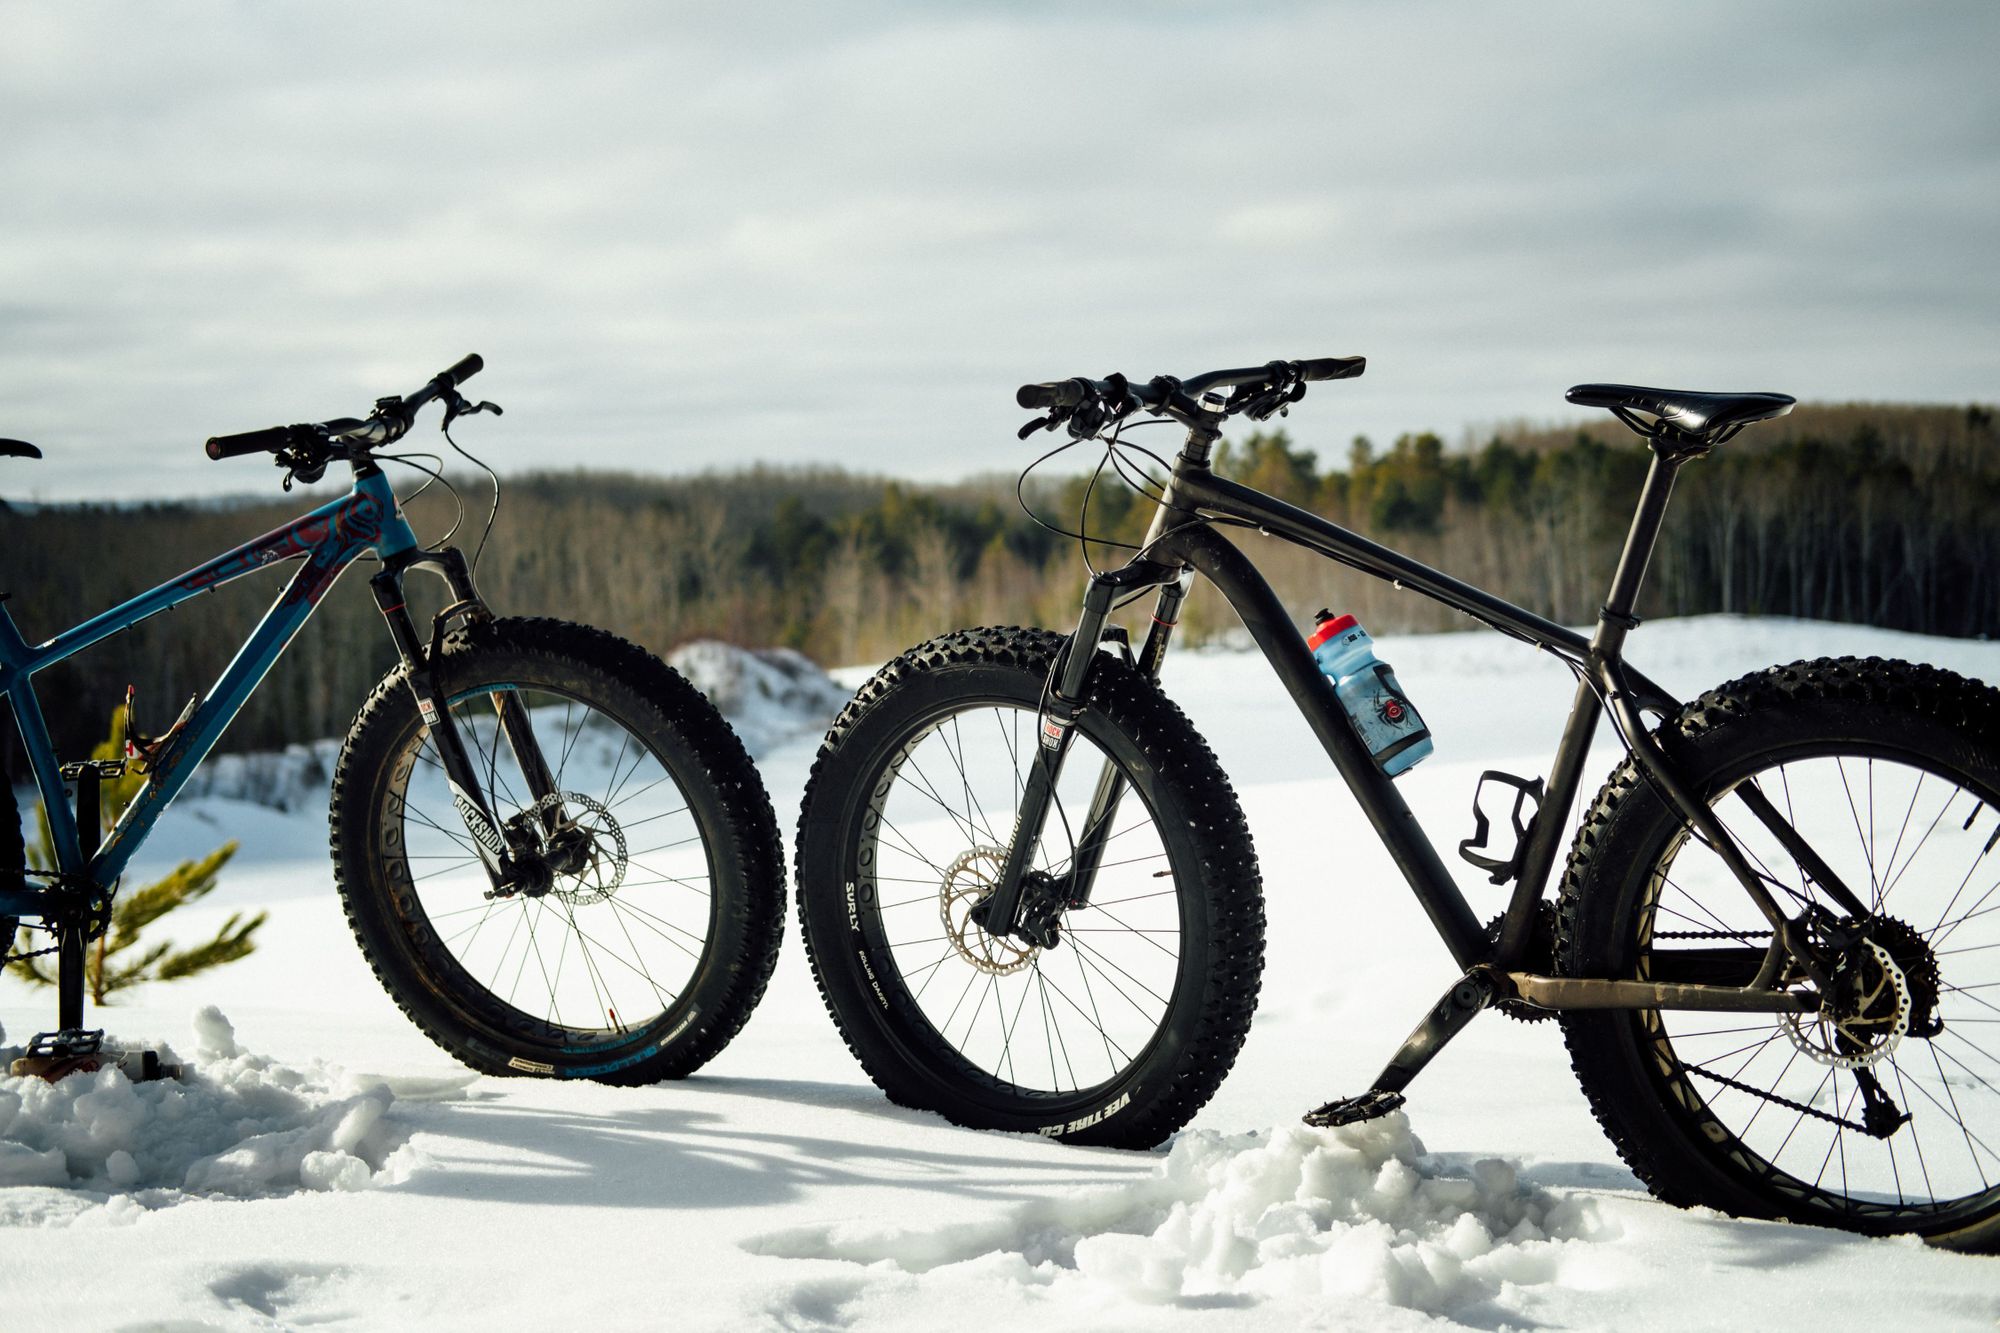 A close-up of two fat bikes in the snow